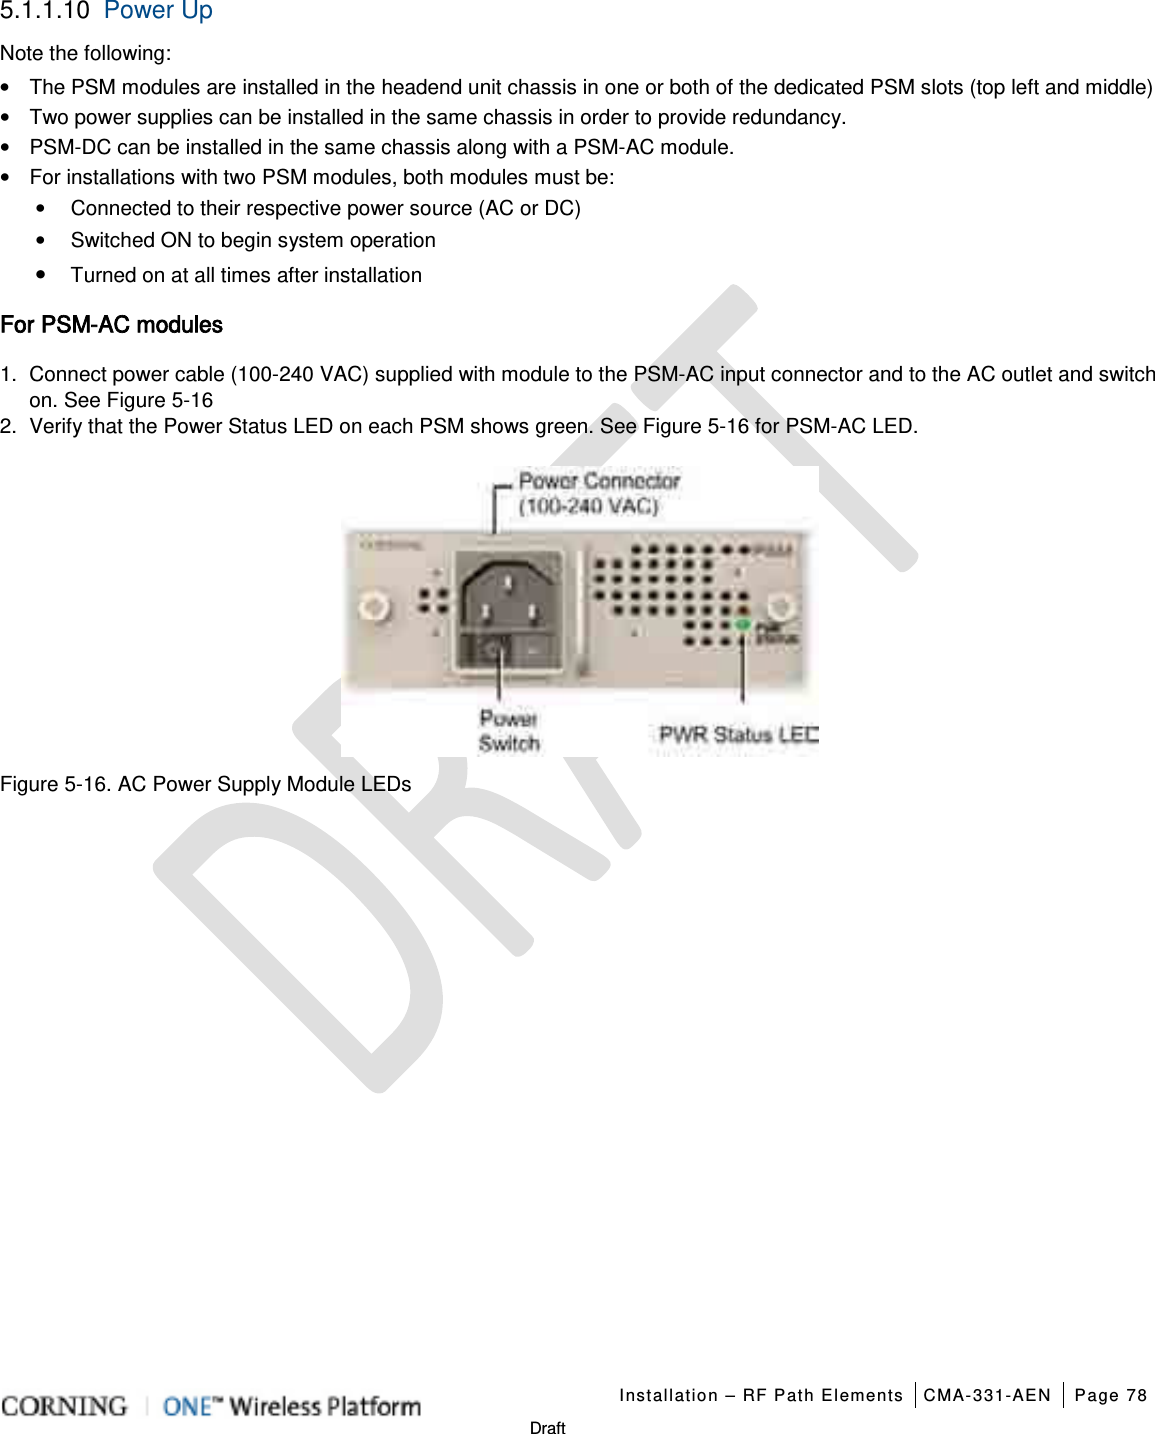   Installation – RF Path Elements CMA-331-AEN Page 78   Draft 5.1.1.10 Power Up Note the following: • The PSM modules are installed in the headend unit chassis in one or both of the dedicated PSM slots (top left and middle) • Two power supplies can be installed in the same chassis in order to provide redundancy. • PSM-DC can be installed in the same chassis along with a PSM-AC module. • For installations with two PSM modules, both modules must be: •  Connected to their respective power source (AC or DC) •  Switched ON to begin system operation • Turned on at all times after installation For PSM-AC modules 1.  Connect power cable (100-240 VAC) supplied with module to the PSM-AC input connector and to the AC outlet and switch on. See Figure  5-16 2.  Verify that the Power Status LED on each PSM shows green. See Figure  5-16 for PSM-AC LED.  Figure  5-16. AC Power Supply Module LEDs   